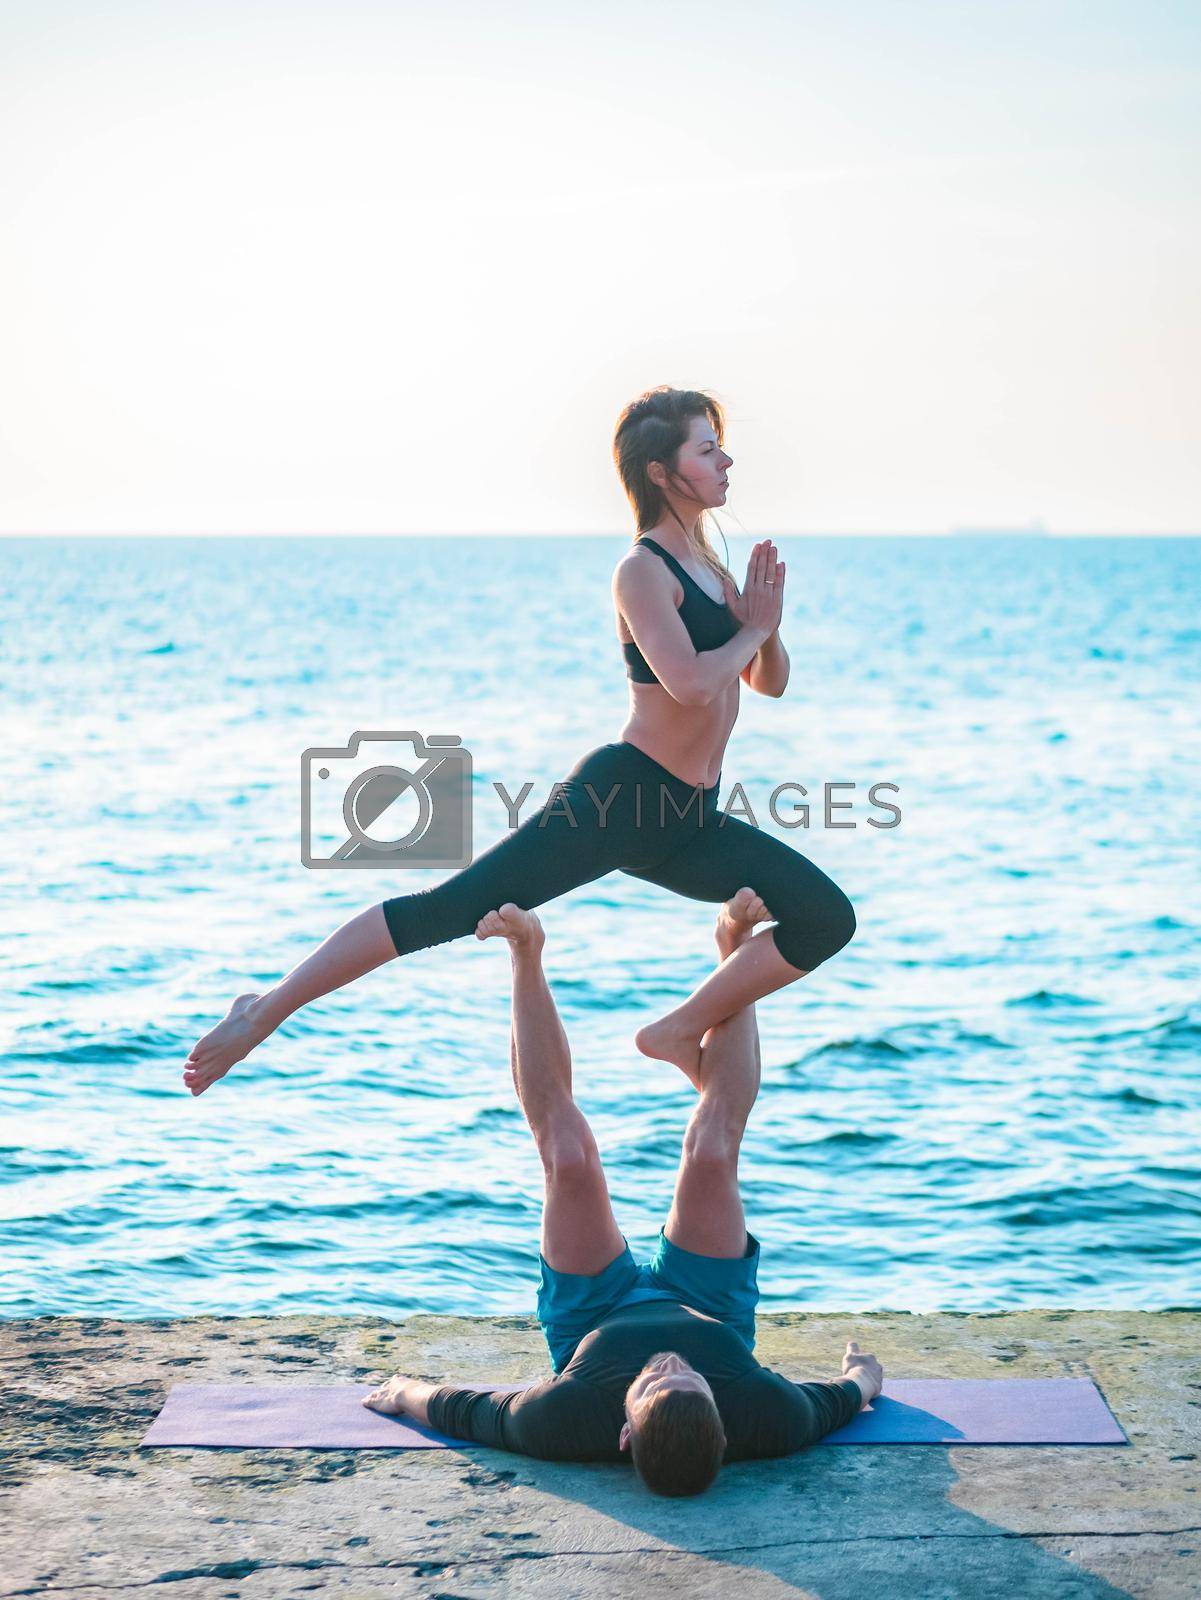 Royalty free image of Young beautiful couple practicing acro yoga on the sea beach near water. Man and woman doing everyday practice outdoor on nature background. Healthy lifestyle concept. by kristina_kokhanova